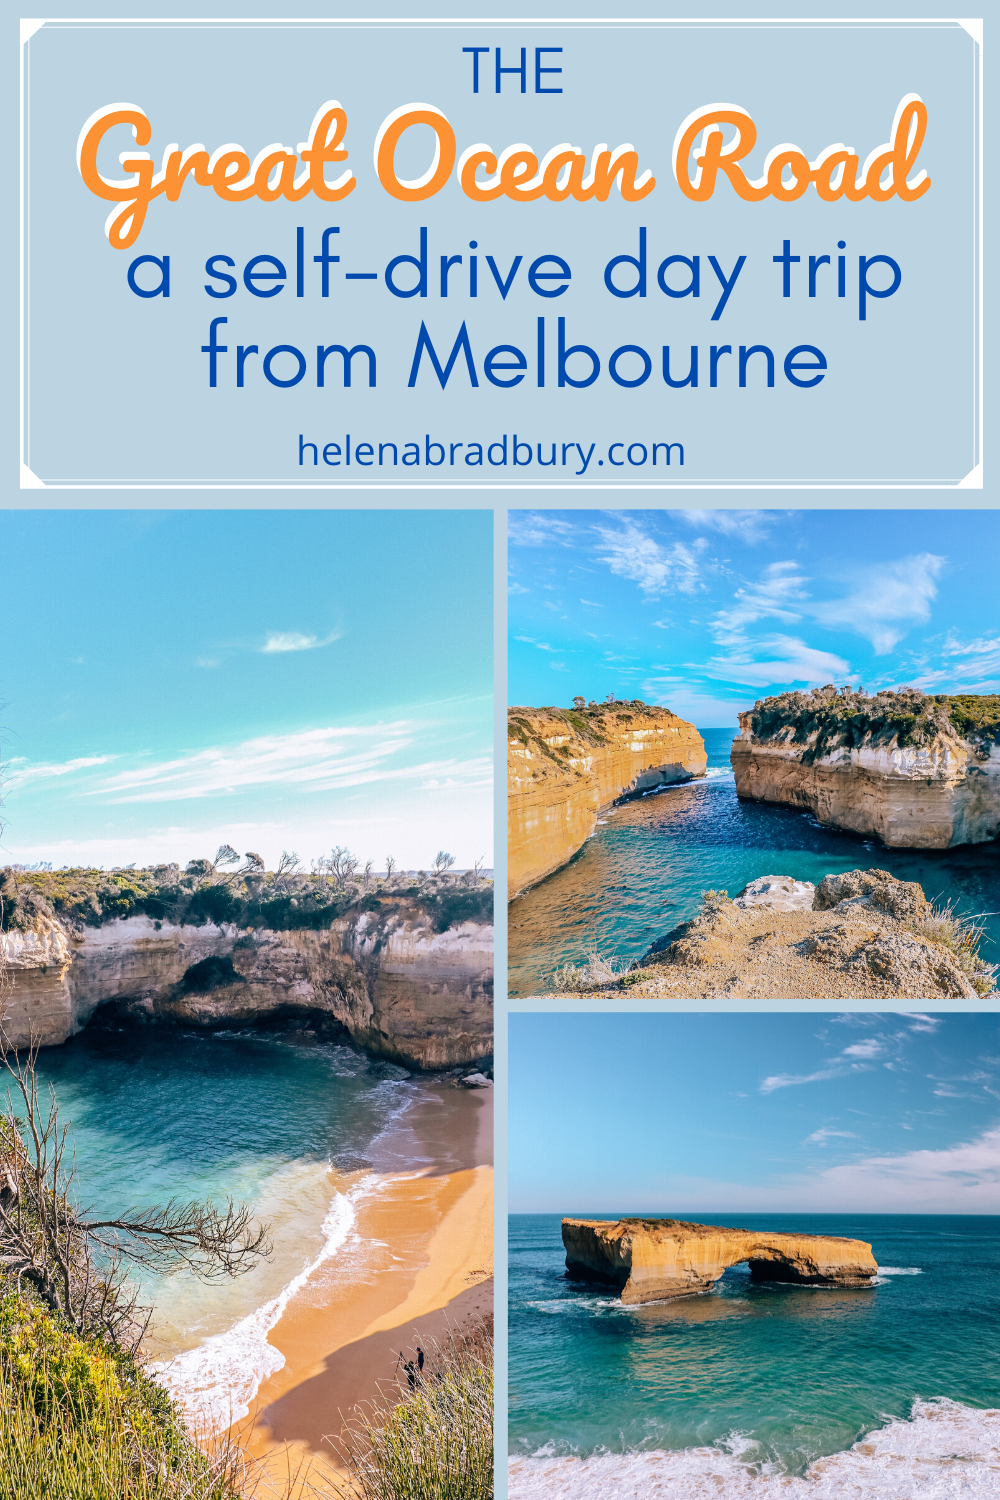 Great Ocean Road day trip from Melbourne: a self-drive itinerary